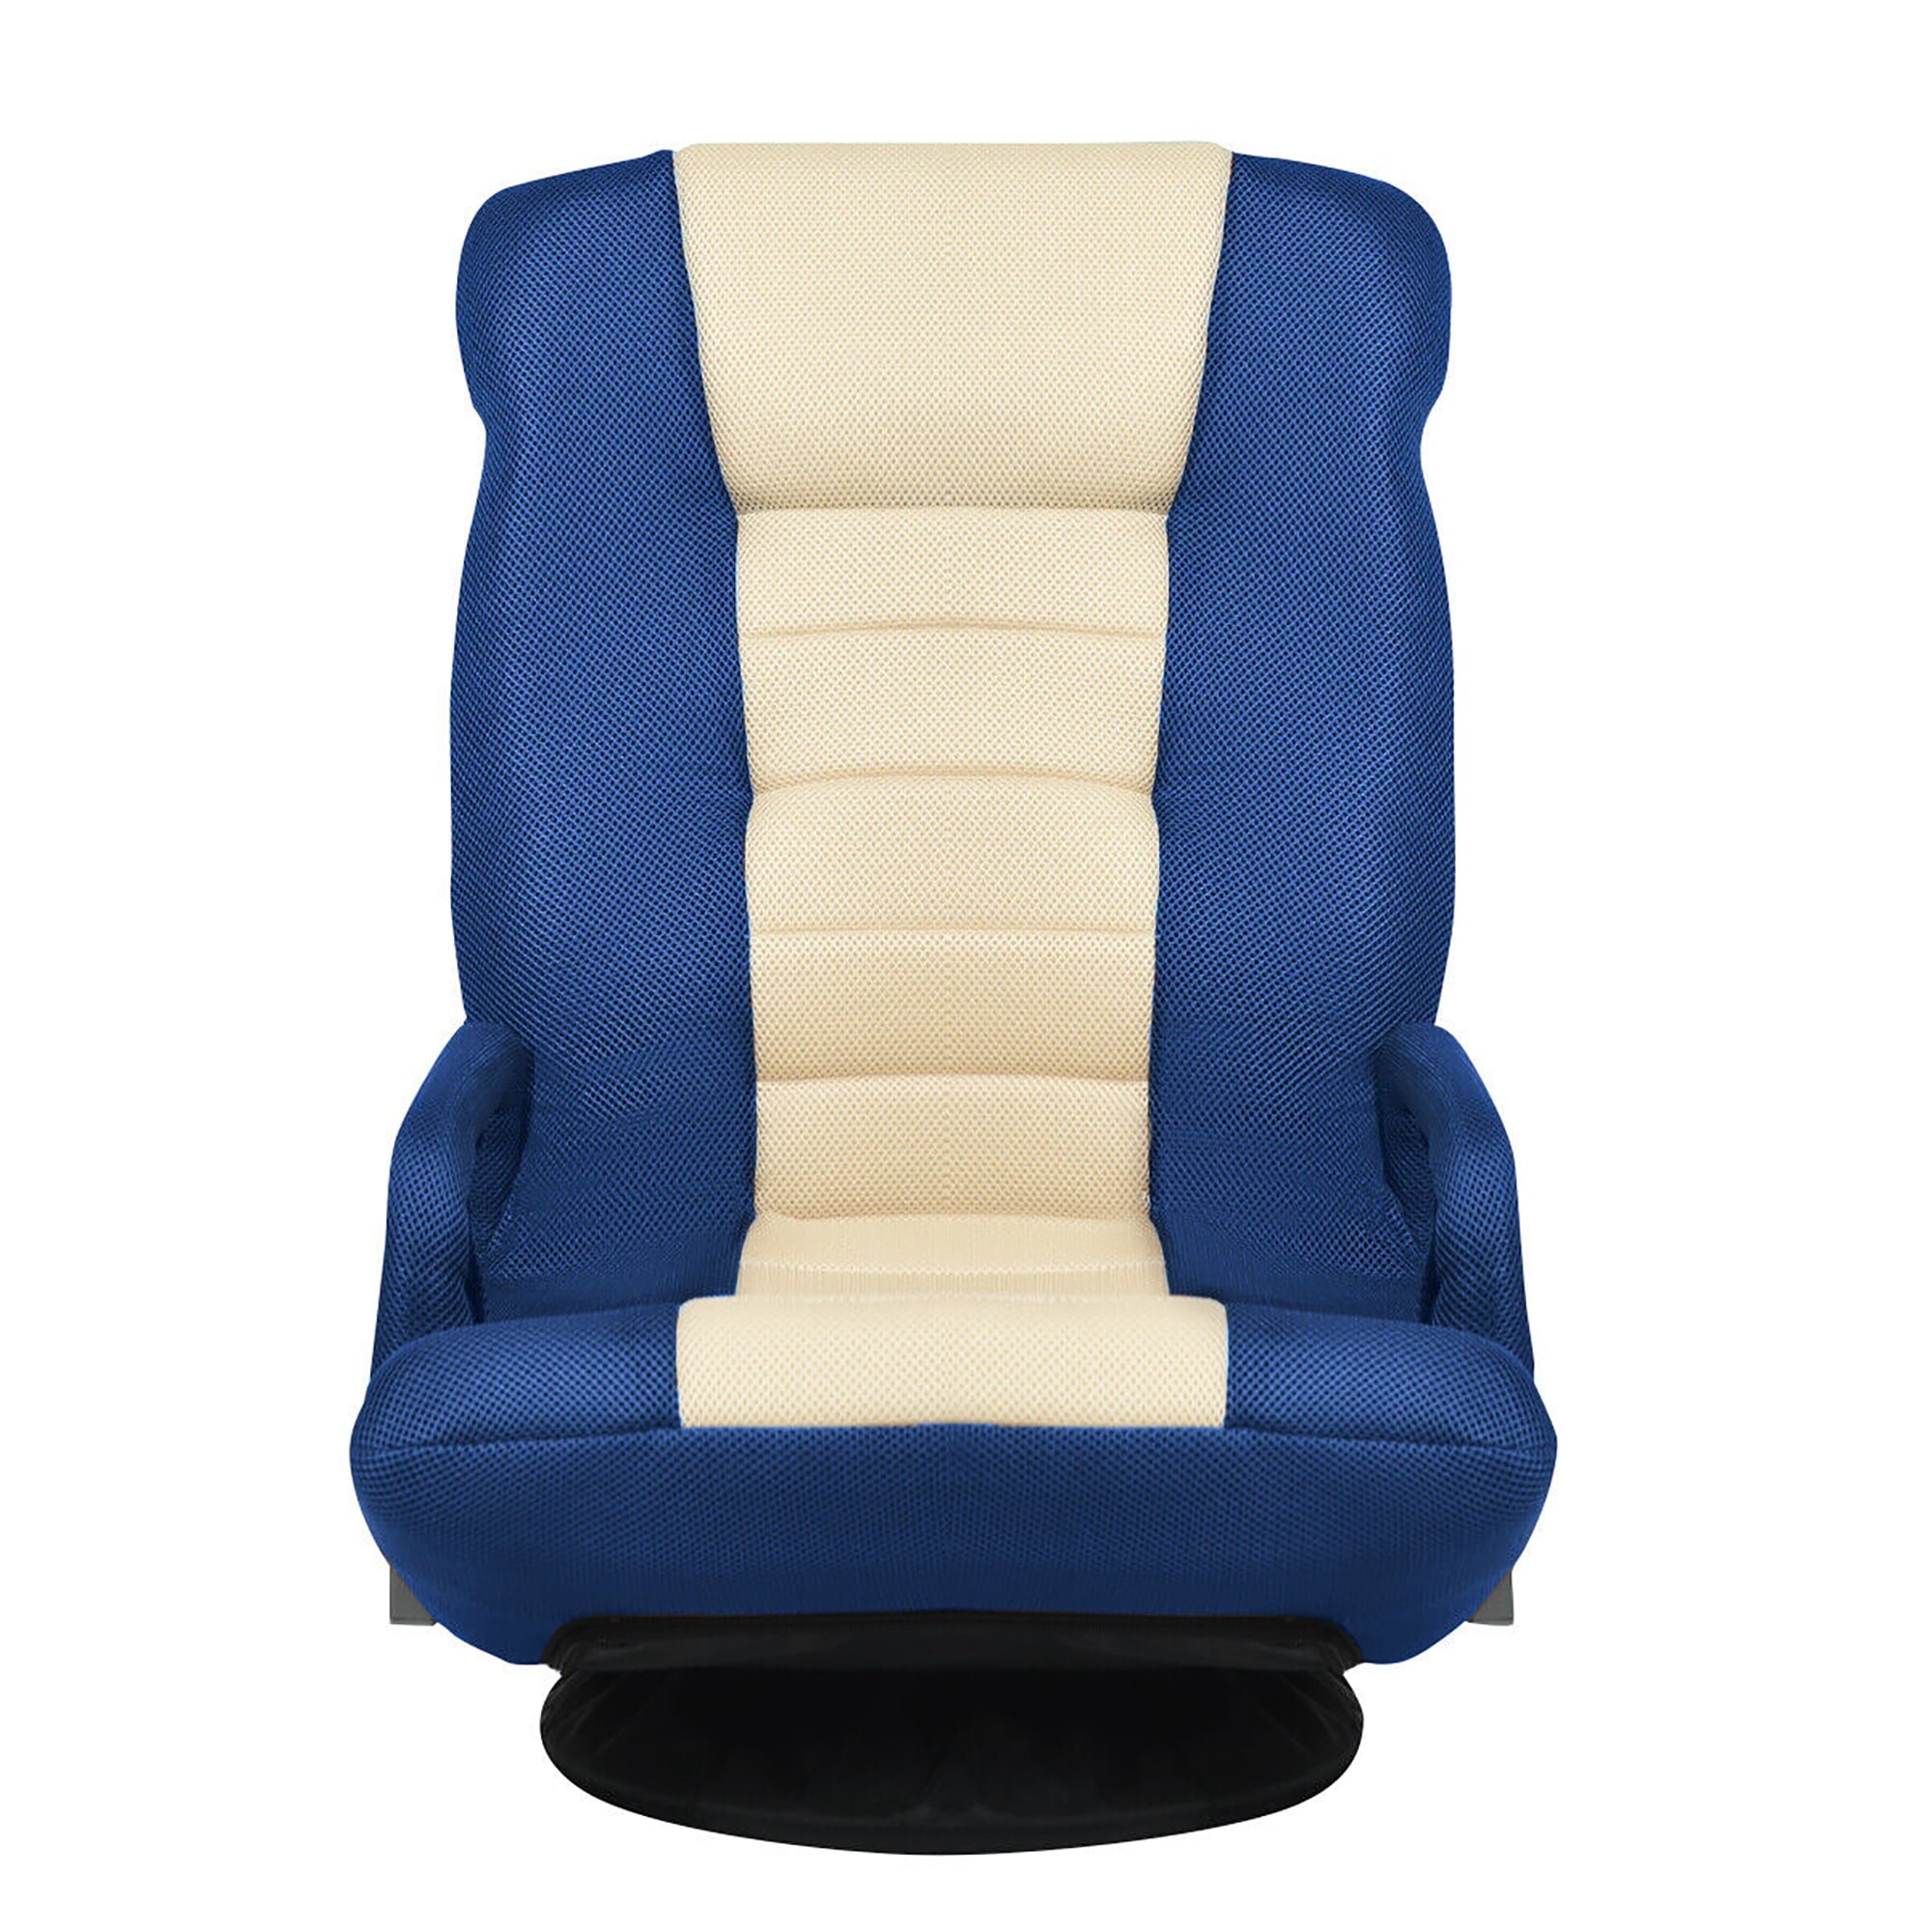 360-Degree Swivel Gaming Floor Chair with Foldable Adjustable Backrest Blue